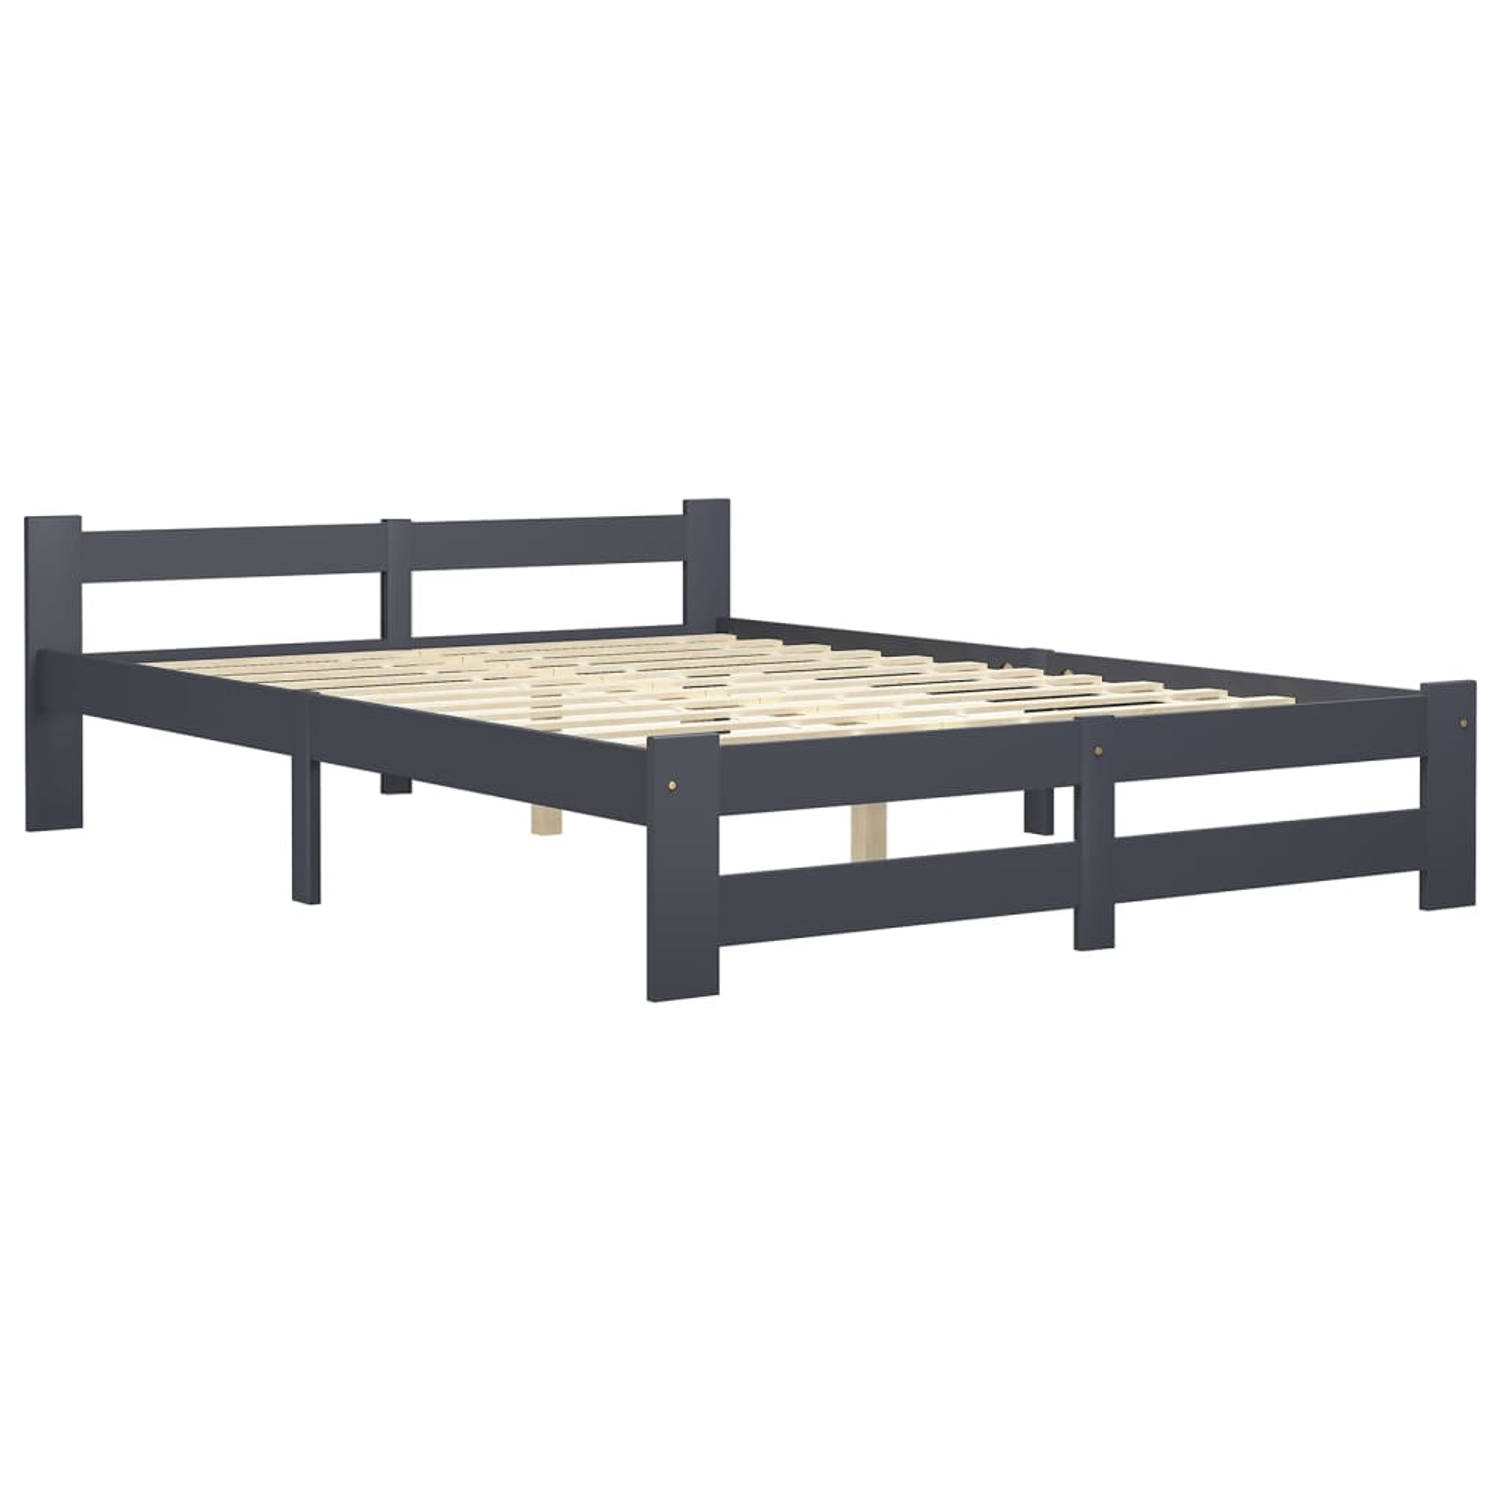 The Living Store Bedframe massief grenenhout donkergrijs 180x200 cm - Bedframe - Bedframes - Bed Frame - Bed Frames - Bed - Bedden - Houten Bedframe - Houten Bedframes - 2-persoons